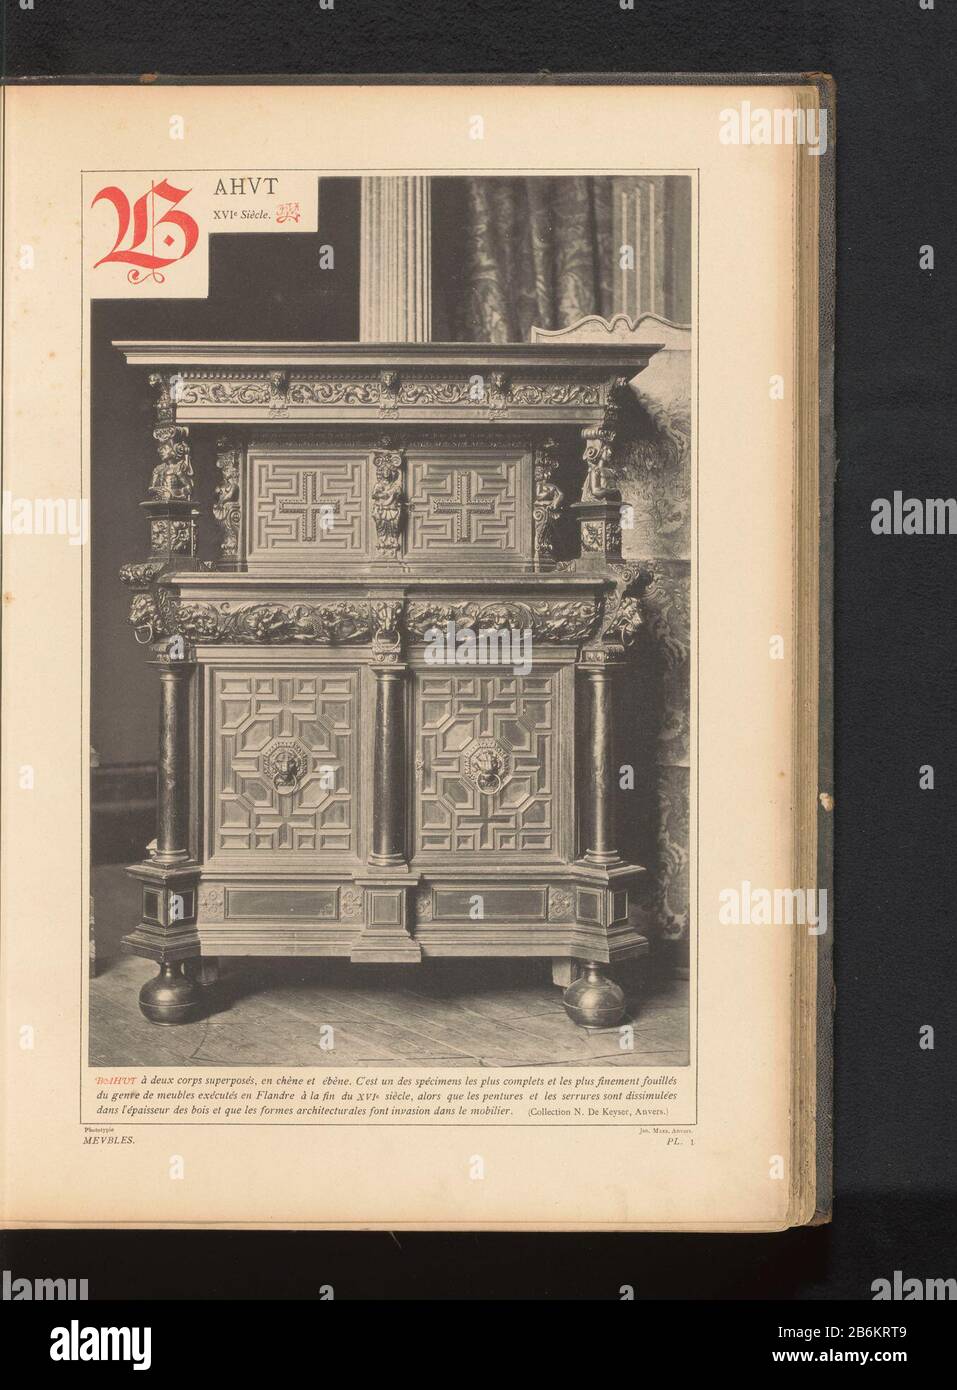 Oak and Ebony kastBahut, XVI Siecle (title object) Property Type: photomechanical print page Item number: RP-F 2001-7-1743-57 Inscriptions / Brands: inscription, recto, printed: 'Bahut à deux (...) 'inscription recto, printed:' MEUBLES. PL. 1.'monogram, recto stamped 'JJvY (Refers Where: apparently to JJ Ysendyck.) Manufacture Creator: Photographer: anoniemclichémaker Joseph Maes (possible) design by: anonymous place manufacture: Antwerp Dating: ca. 1881 - or for 1889 Material: paper Technique: copying / photolithography dimensions: print: h 341 mm × W 235 mm Subject: furniture to put things i Stock Photo